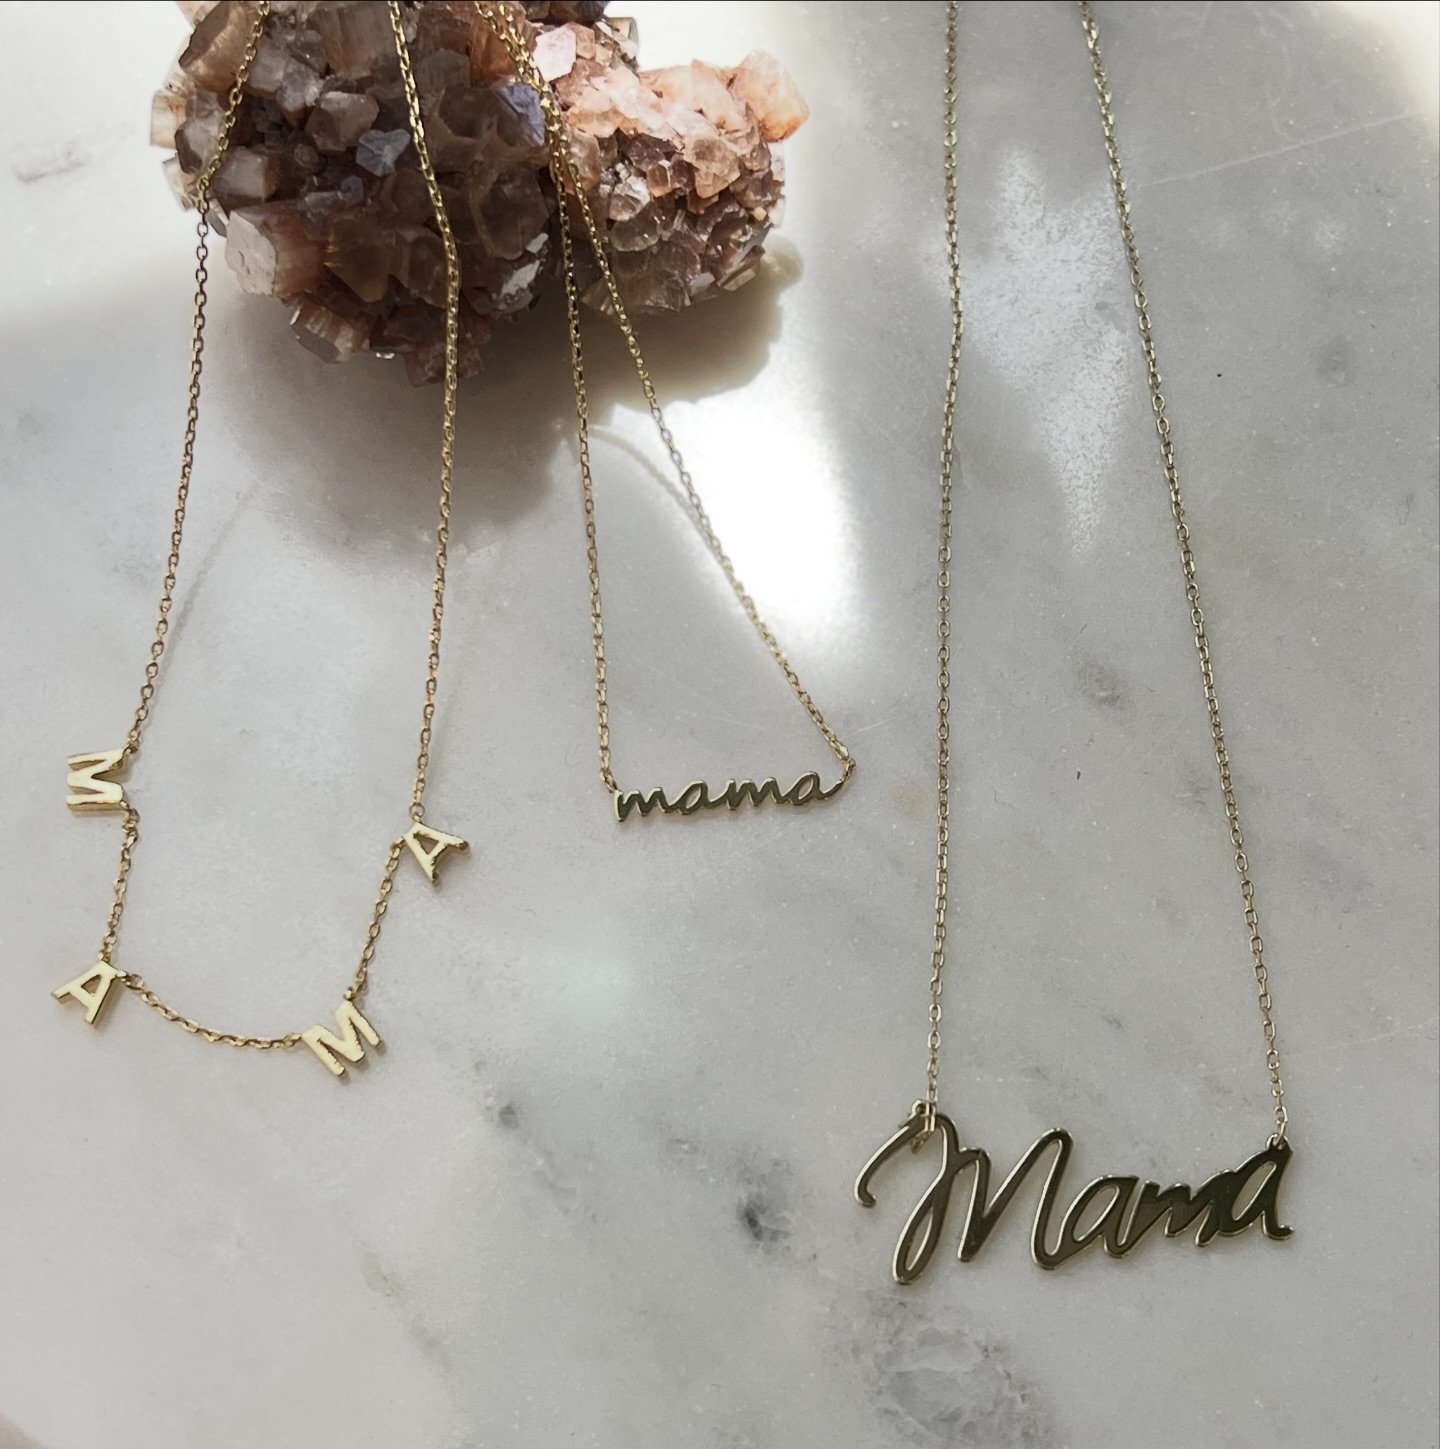 Love you MAMA 🤍 
All jewels 15% off this weekend!